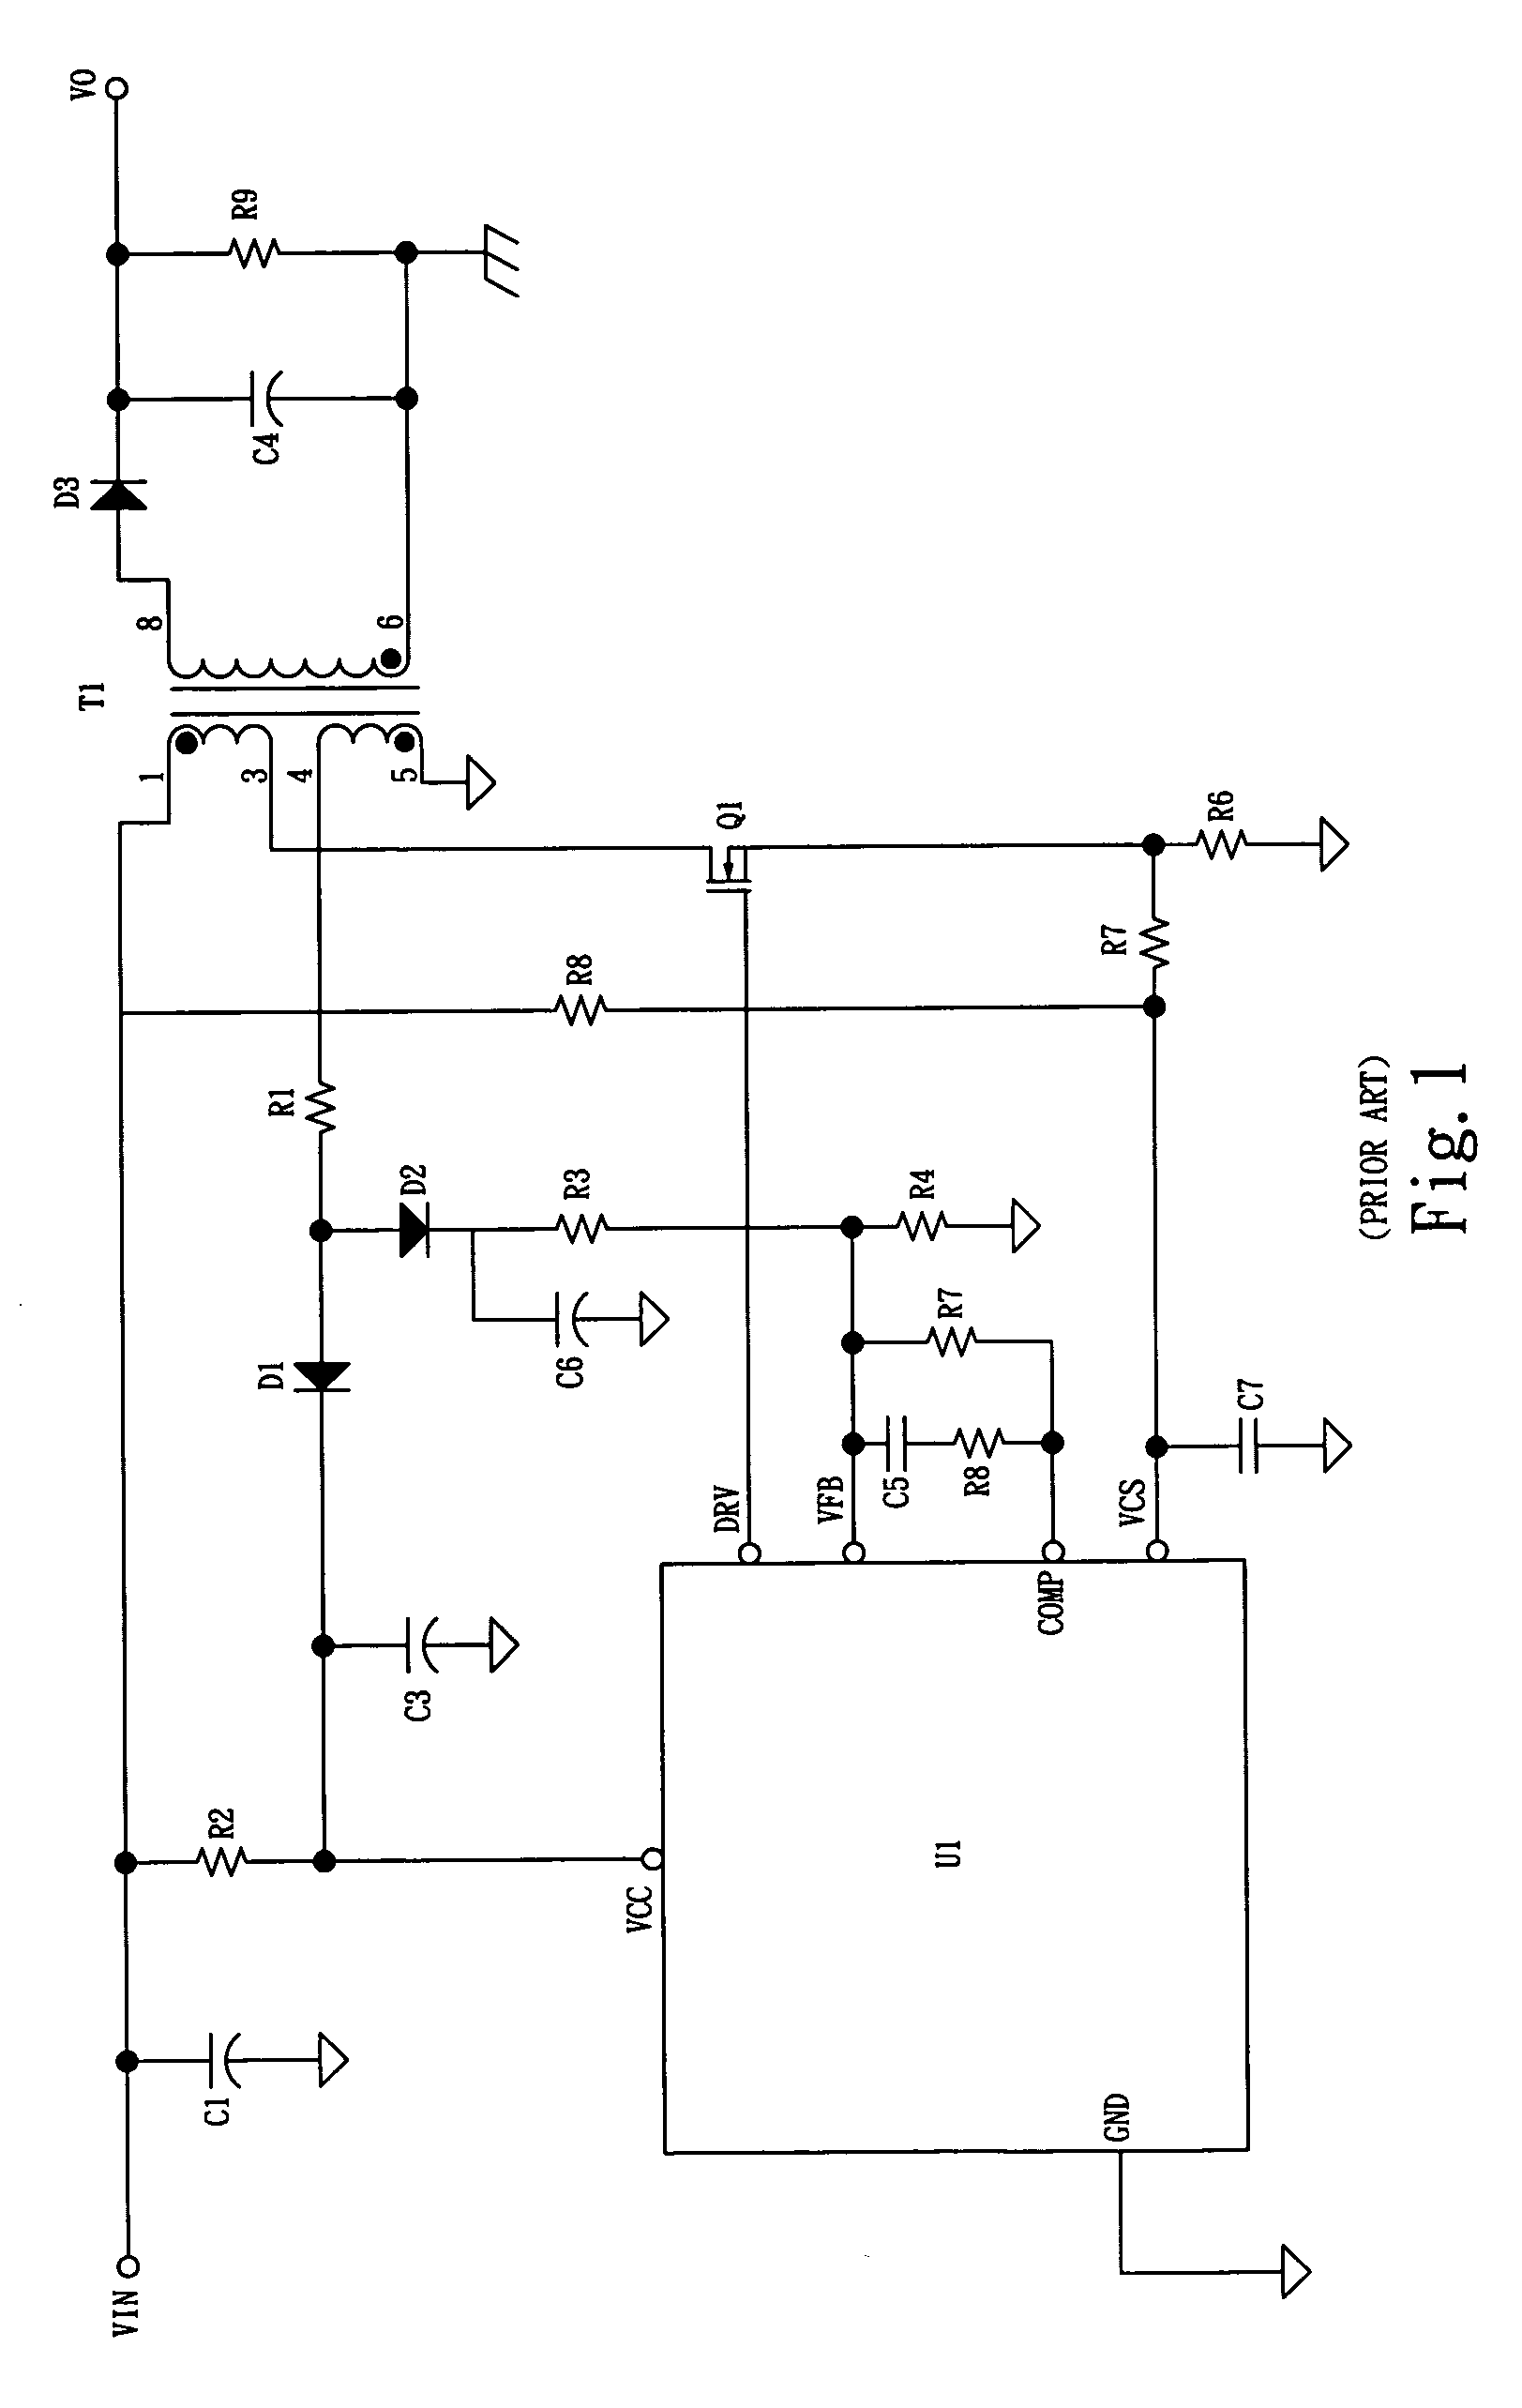 Primary-side feedback switching power supply